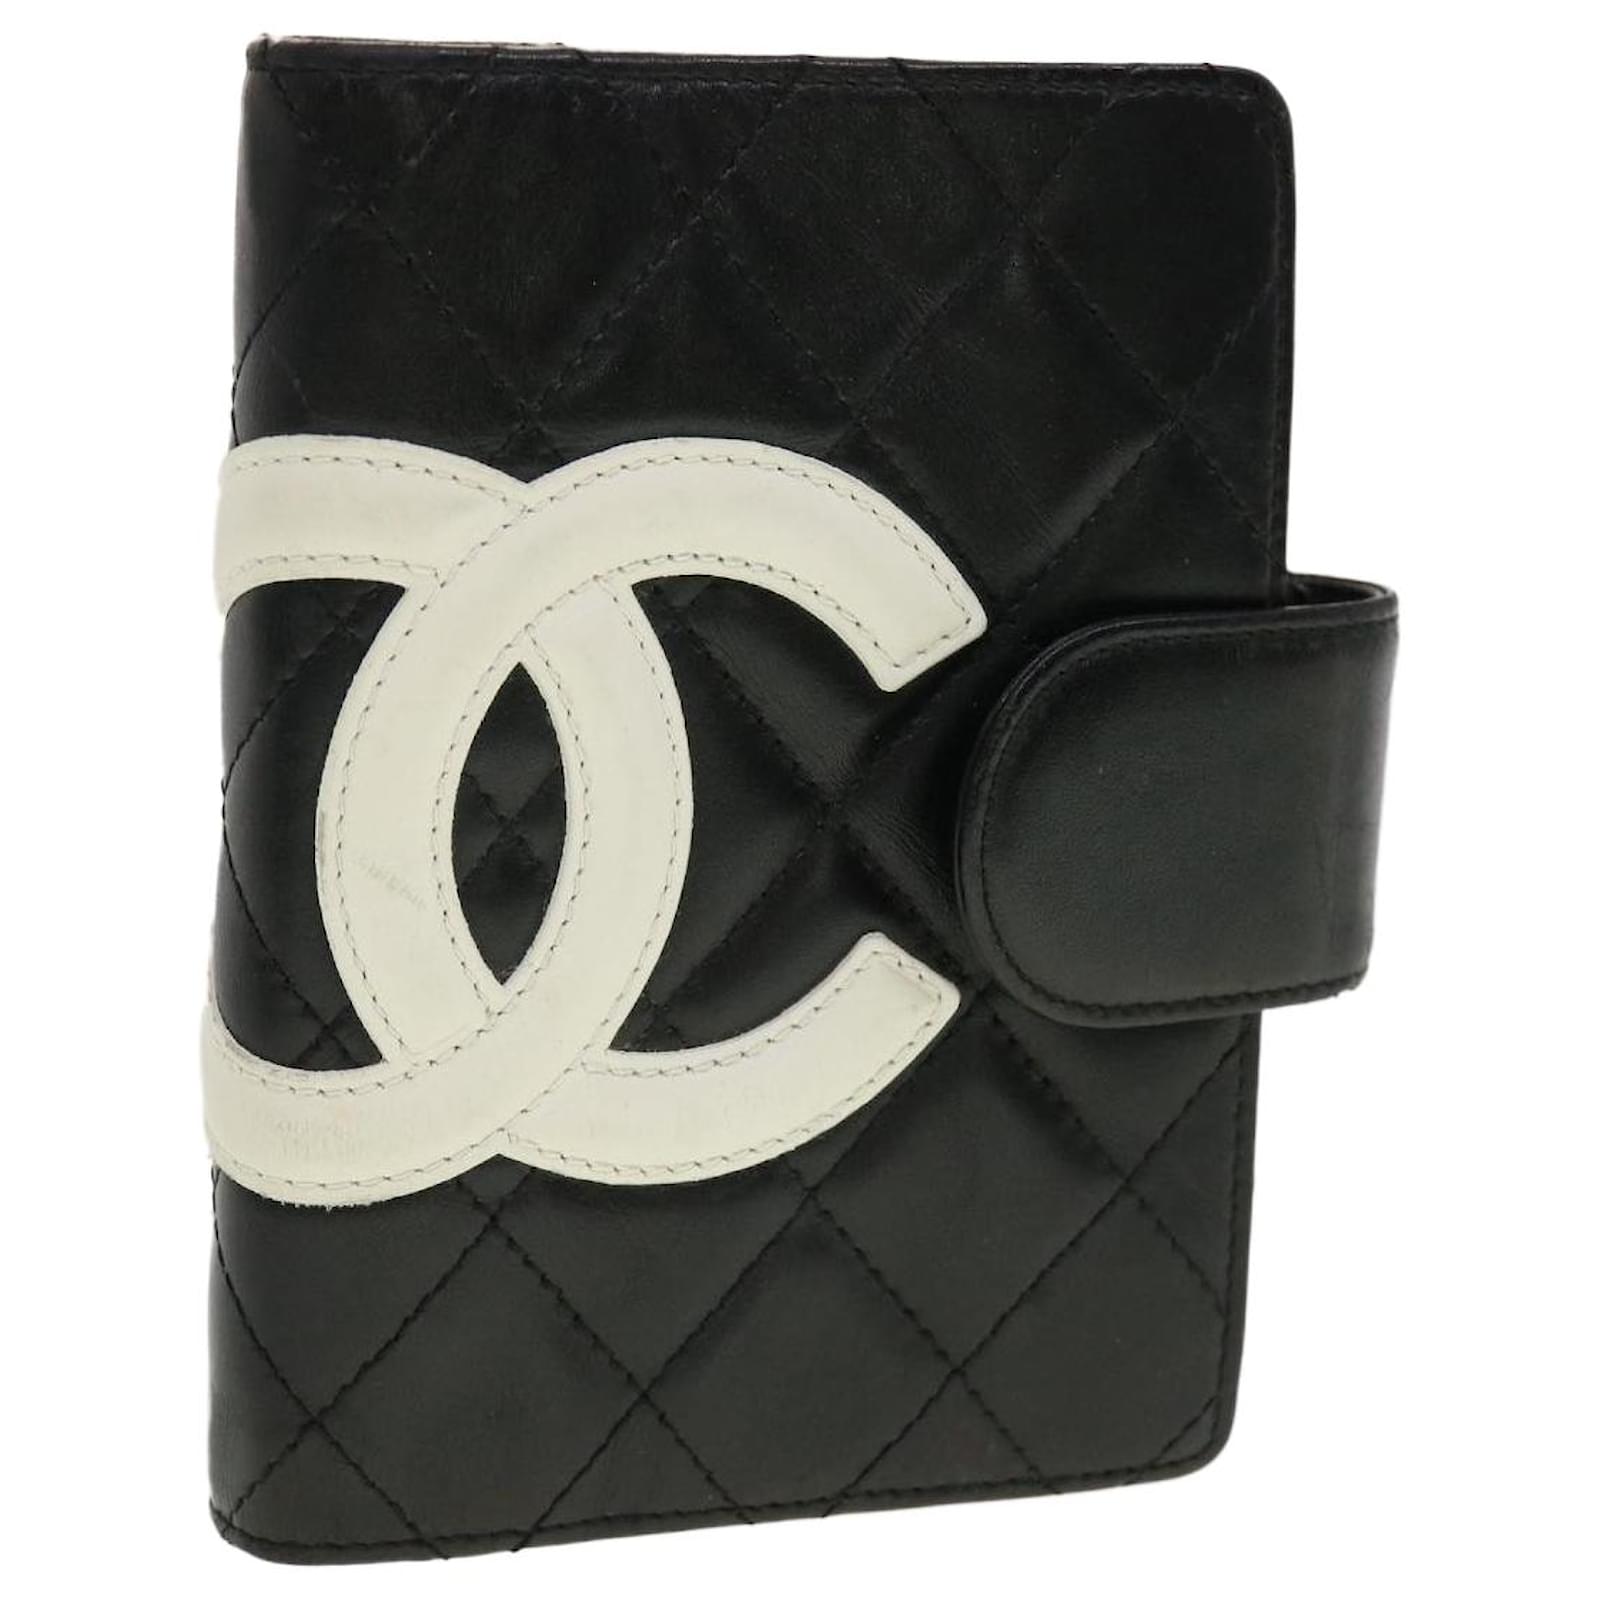 CHANEL Cambon Line Day Planner Cover Leather Black CC Auth th3612